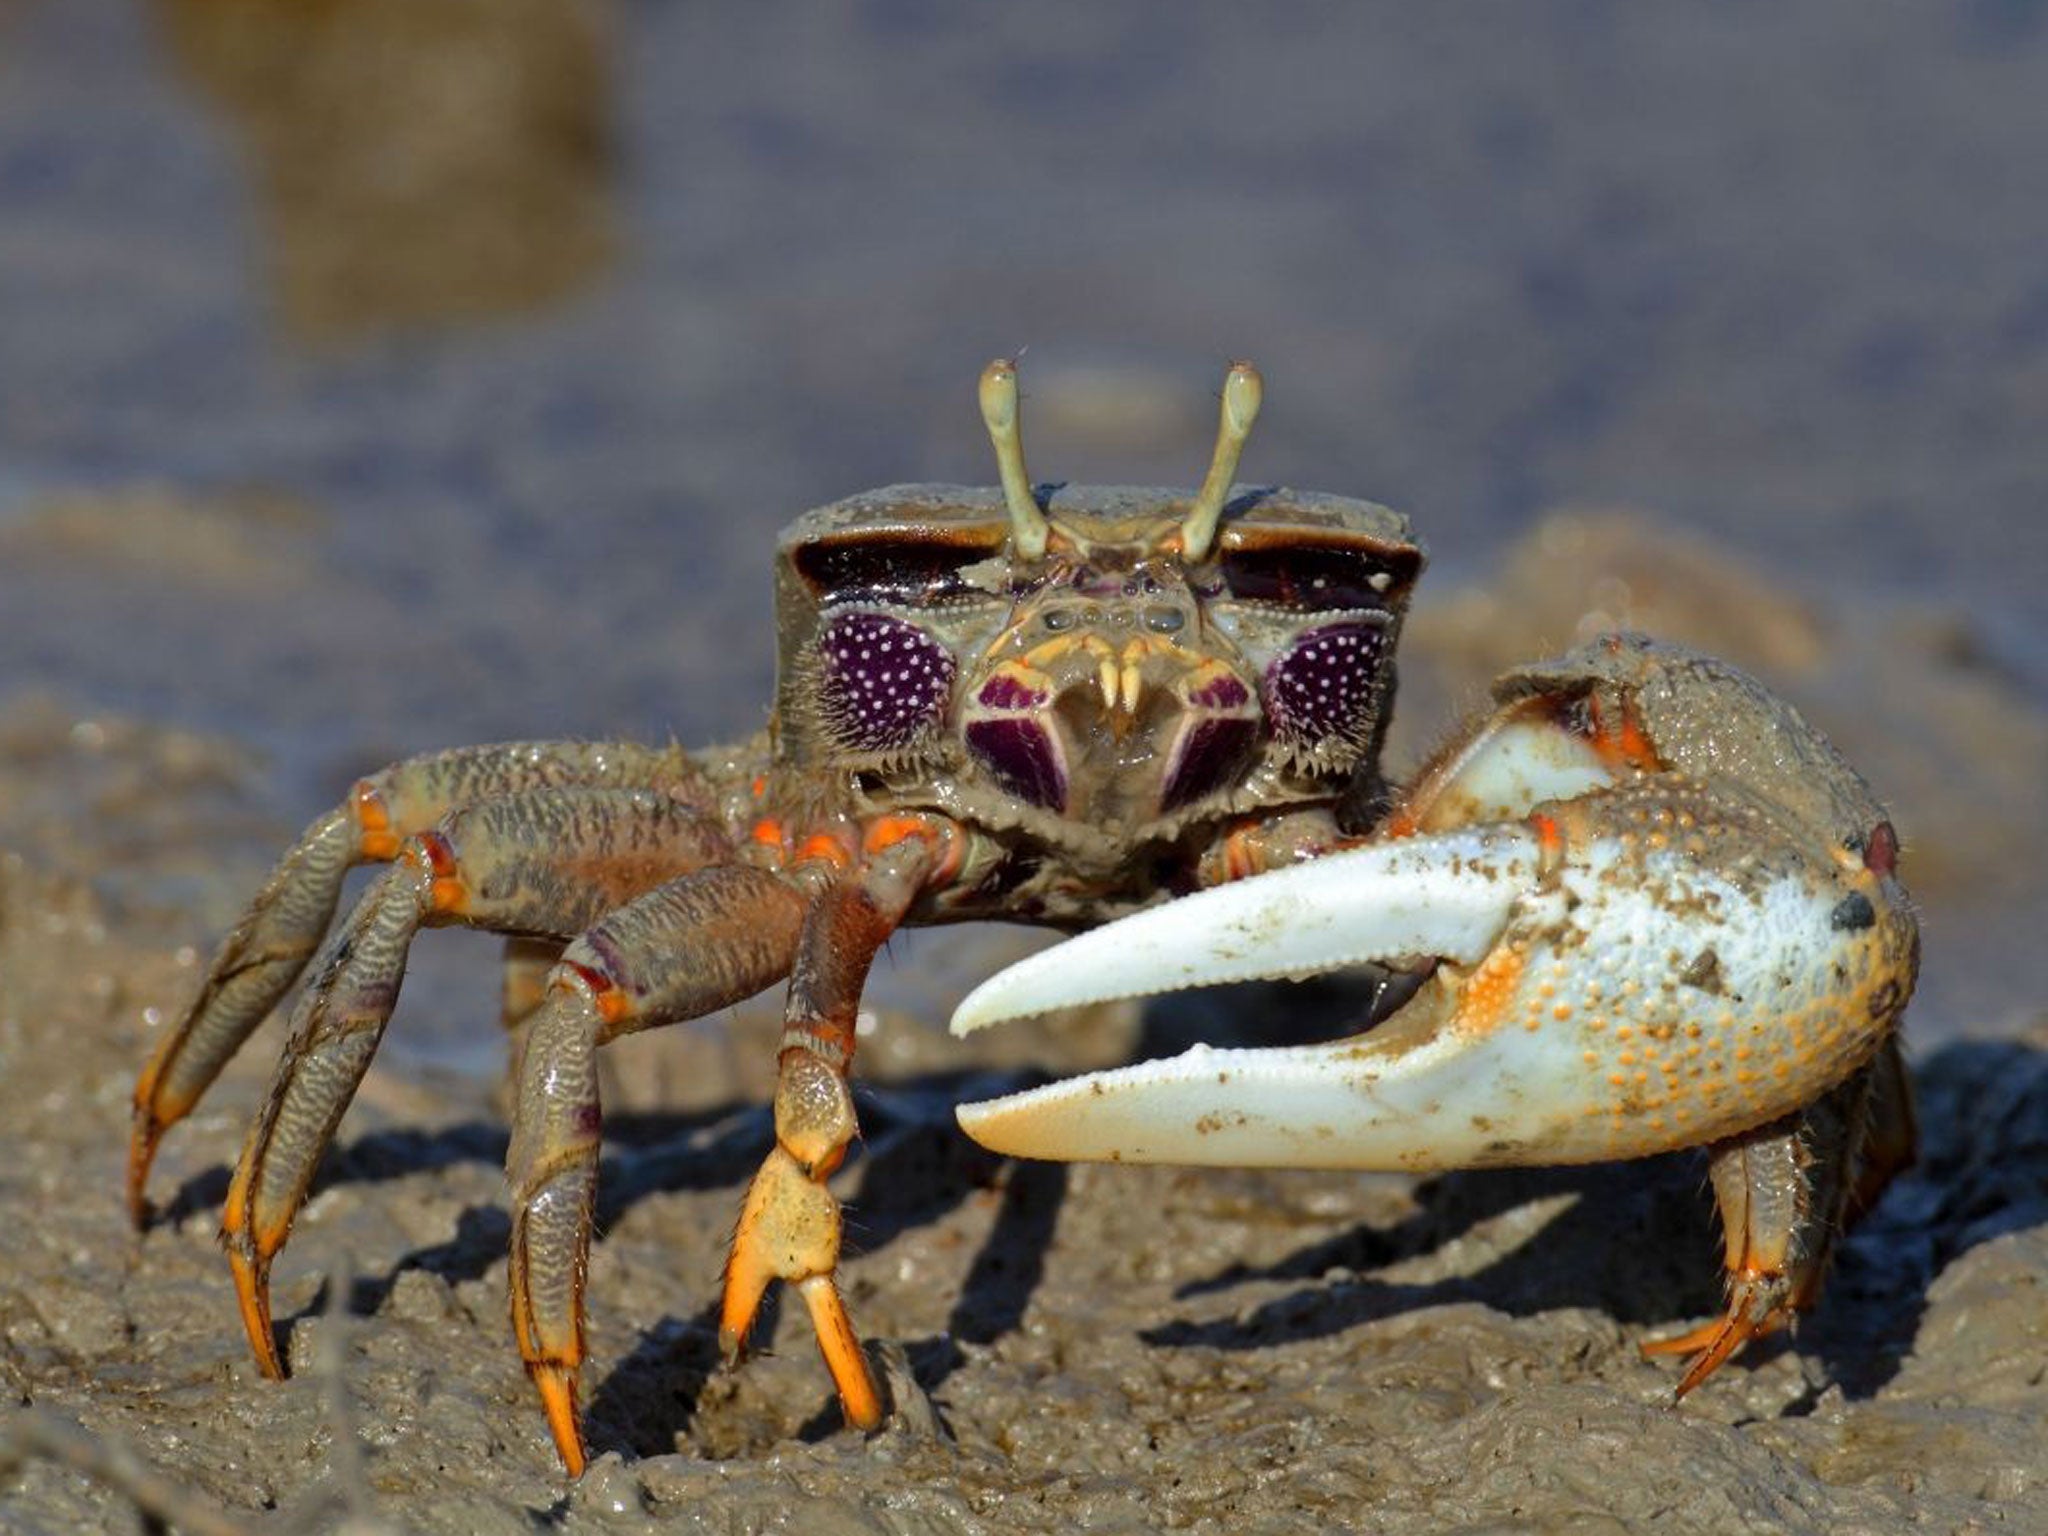 Fiddler crabs: During mating displays, the males stand beside other males who have smaller claws to make?their own claws look bigger